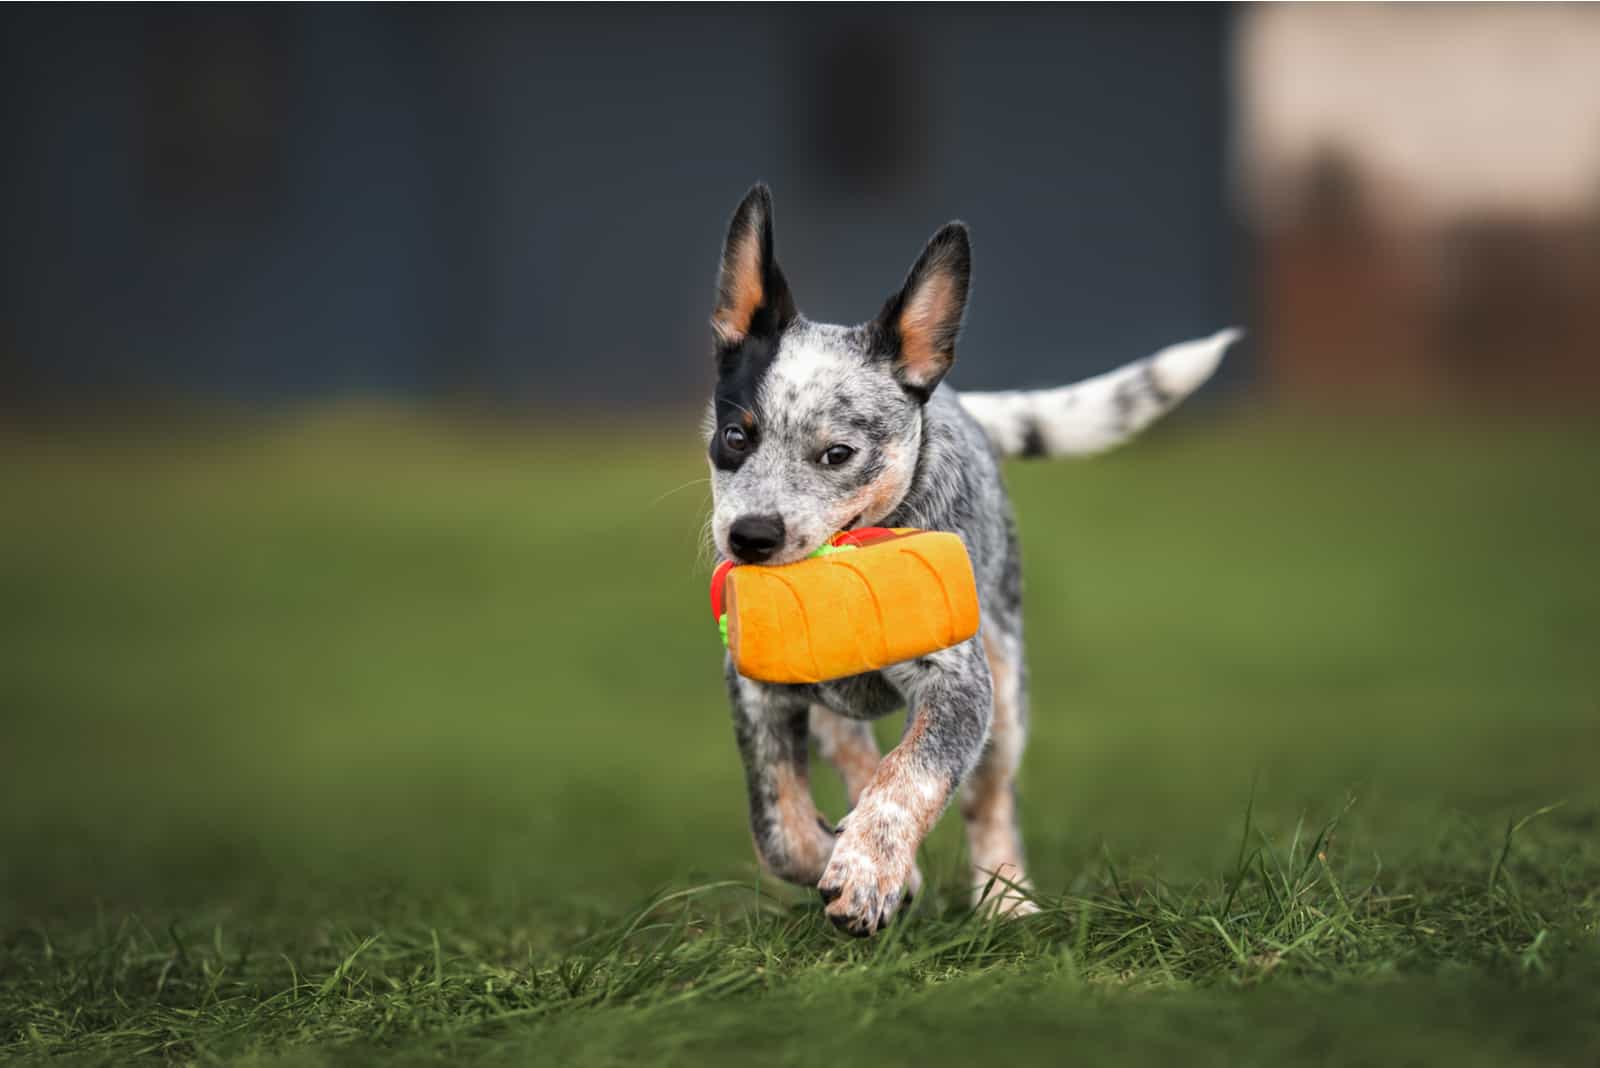 blue heeler puppy playing with a toy